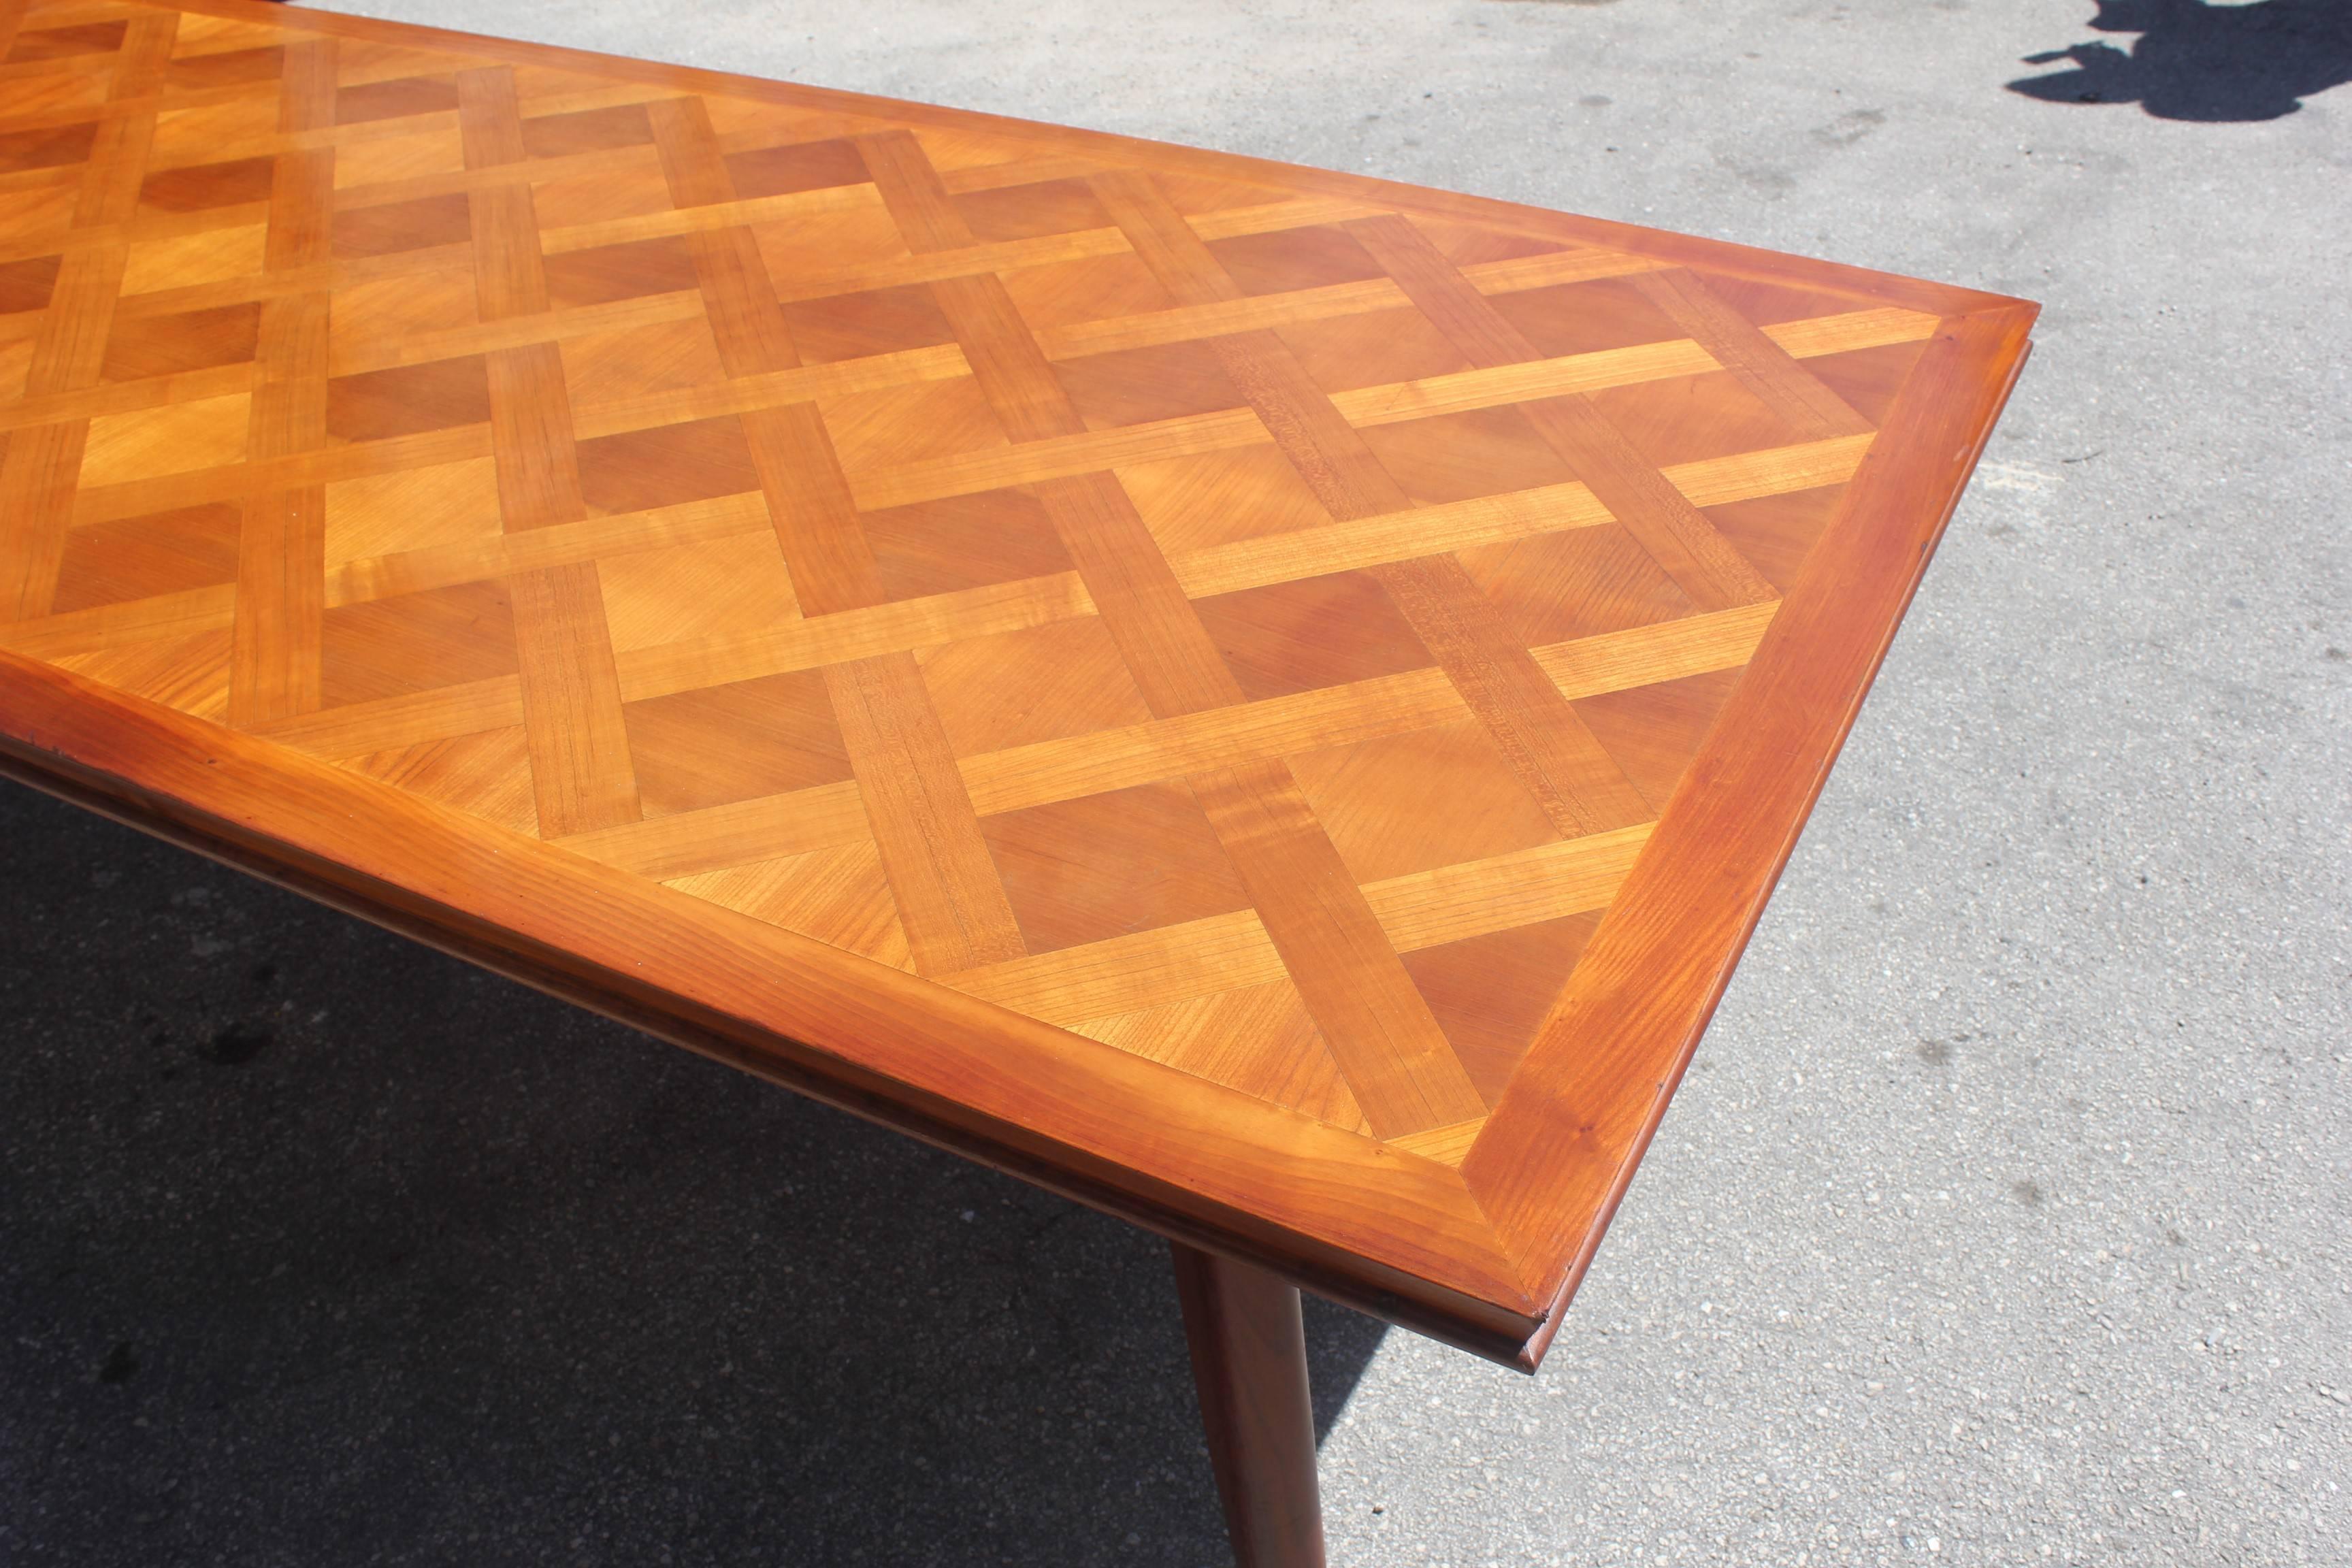 Master Piece French Art Deco Dining Table Cherry Wood by Leon Jallot, 1930s For Sale 1